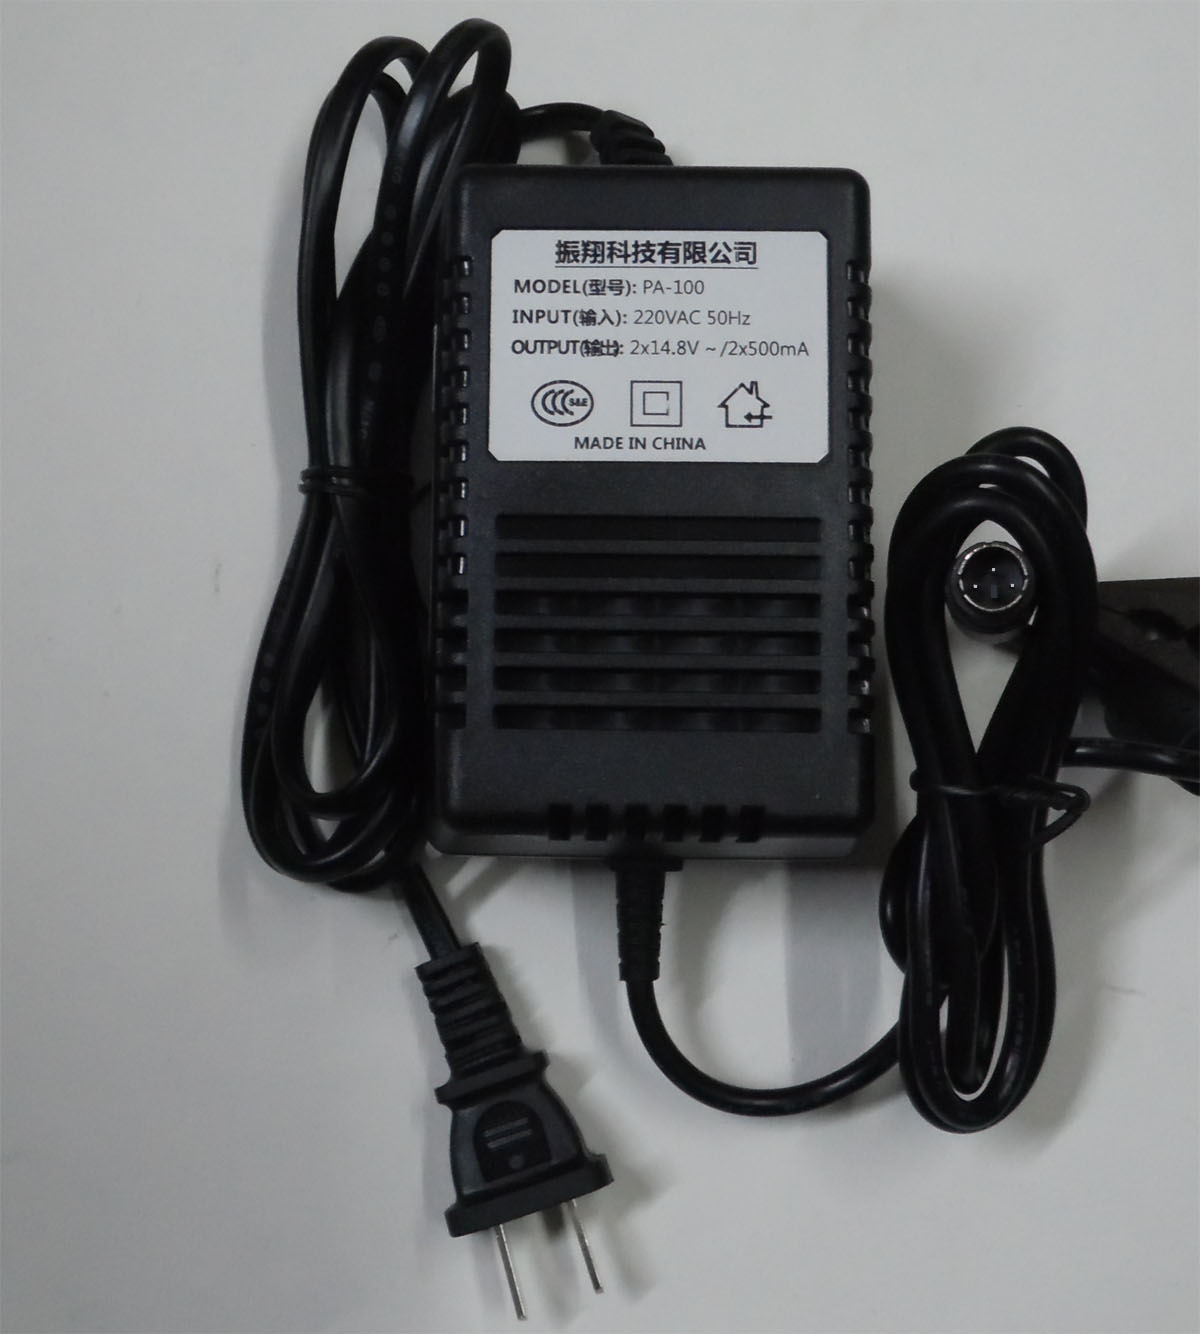 100% Brand New 220VAC 50Hz Behringer PA-100 XENYX1002FX 1202FX AC/DC POWER SUPPLY ADAPTER - Click Image to Close